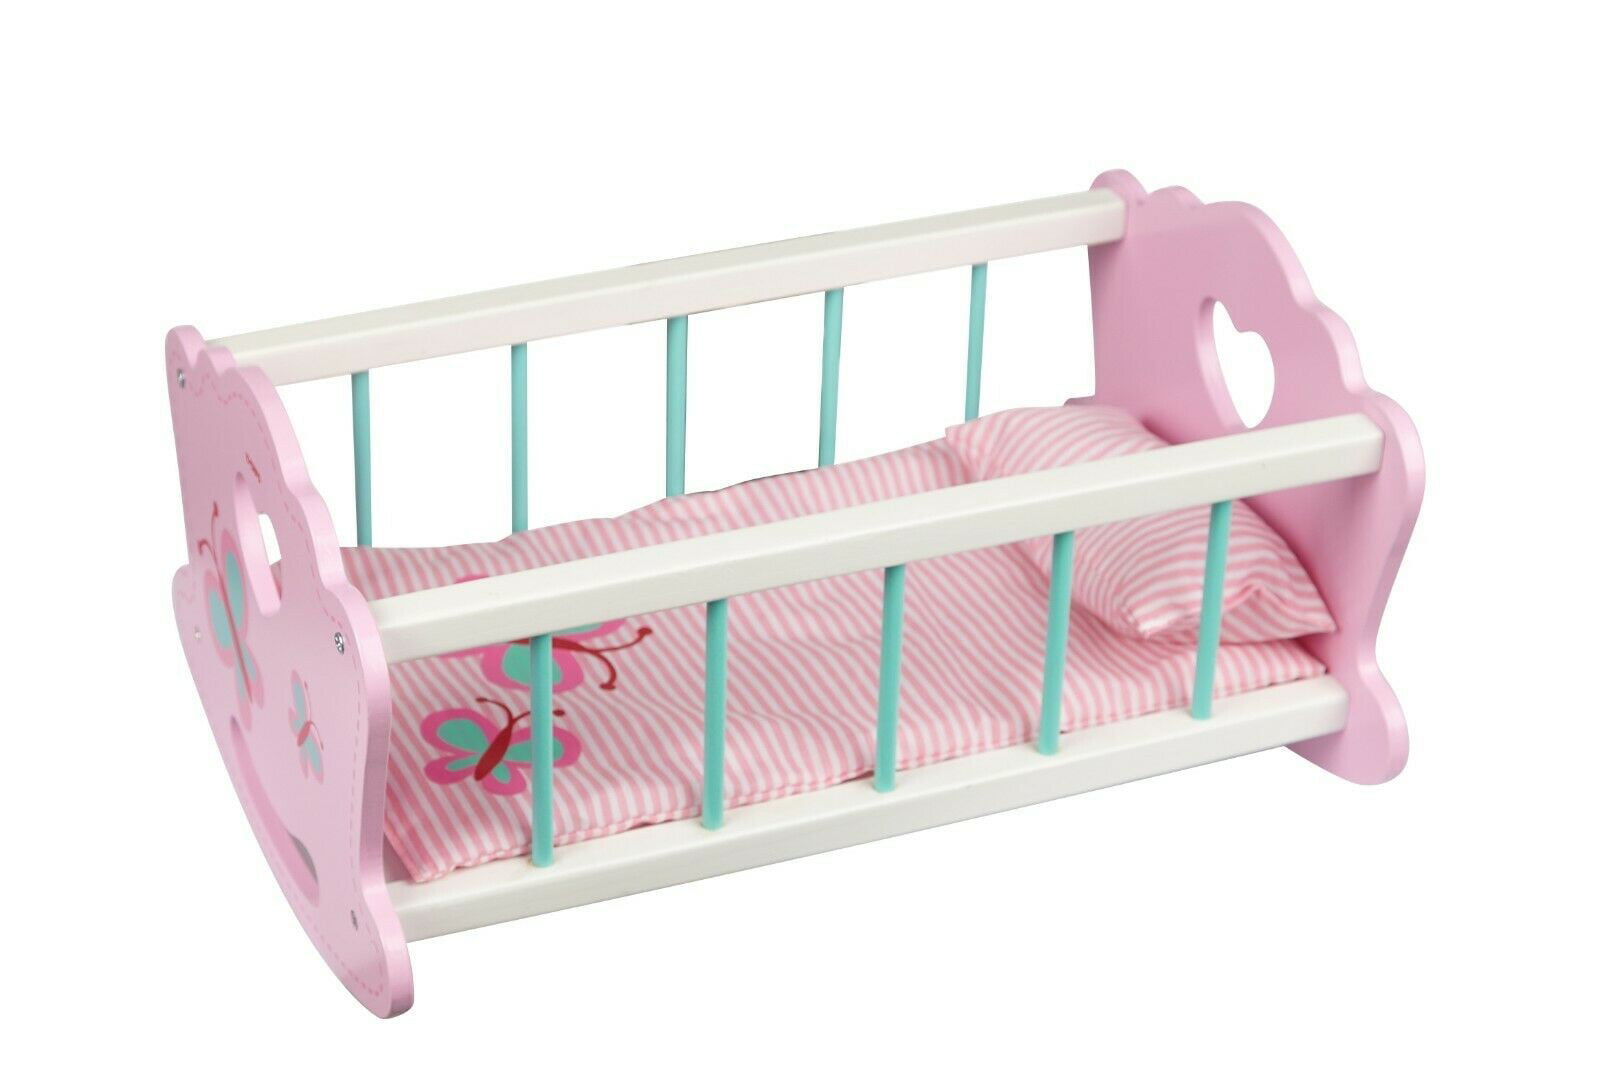 baby doll and cradle